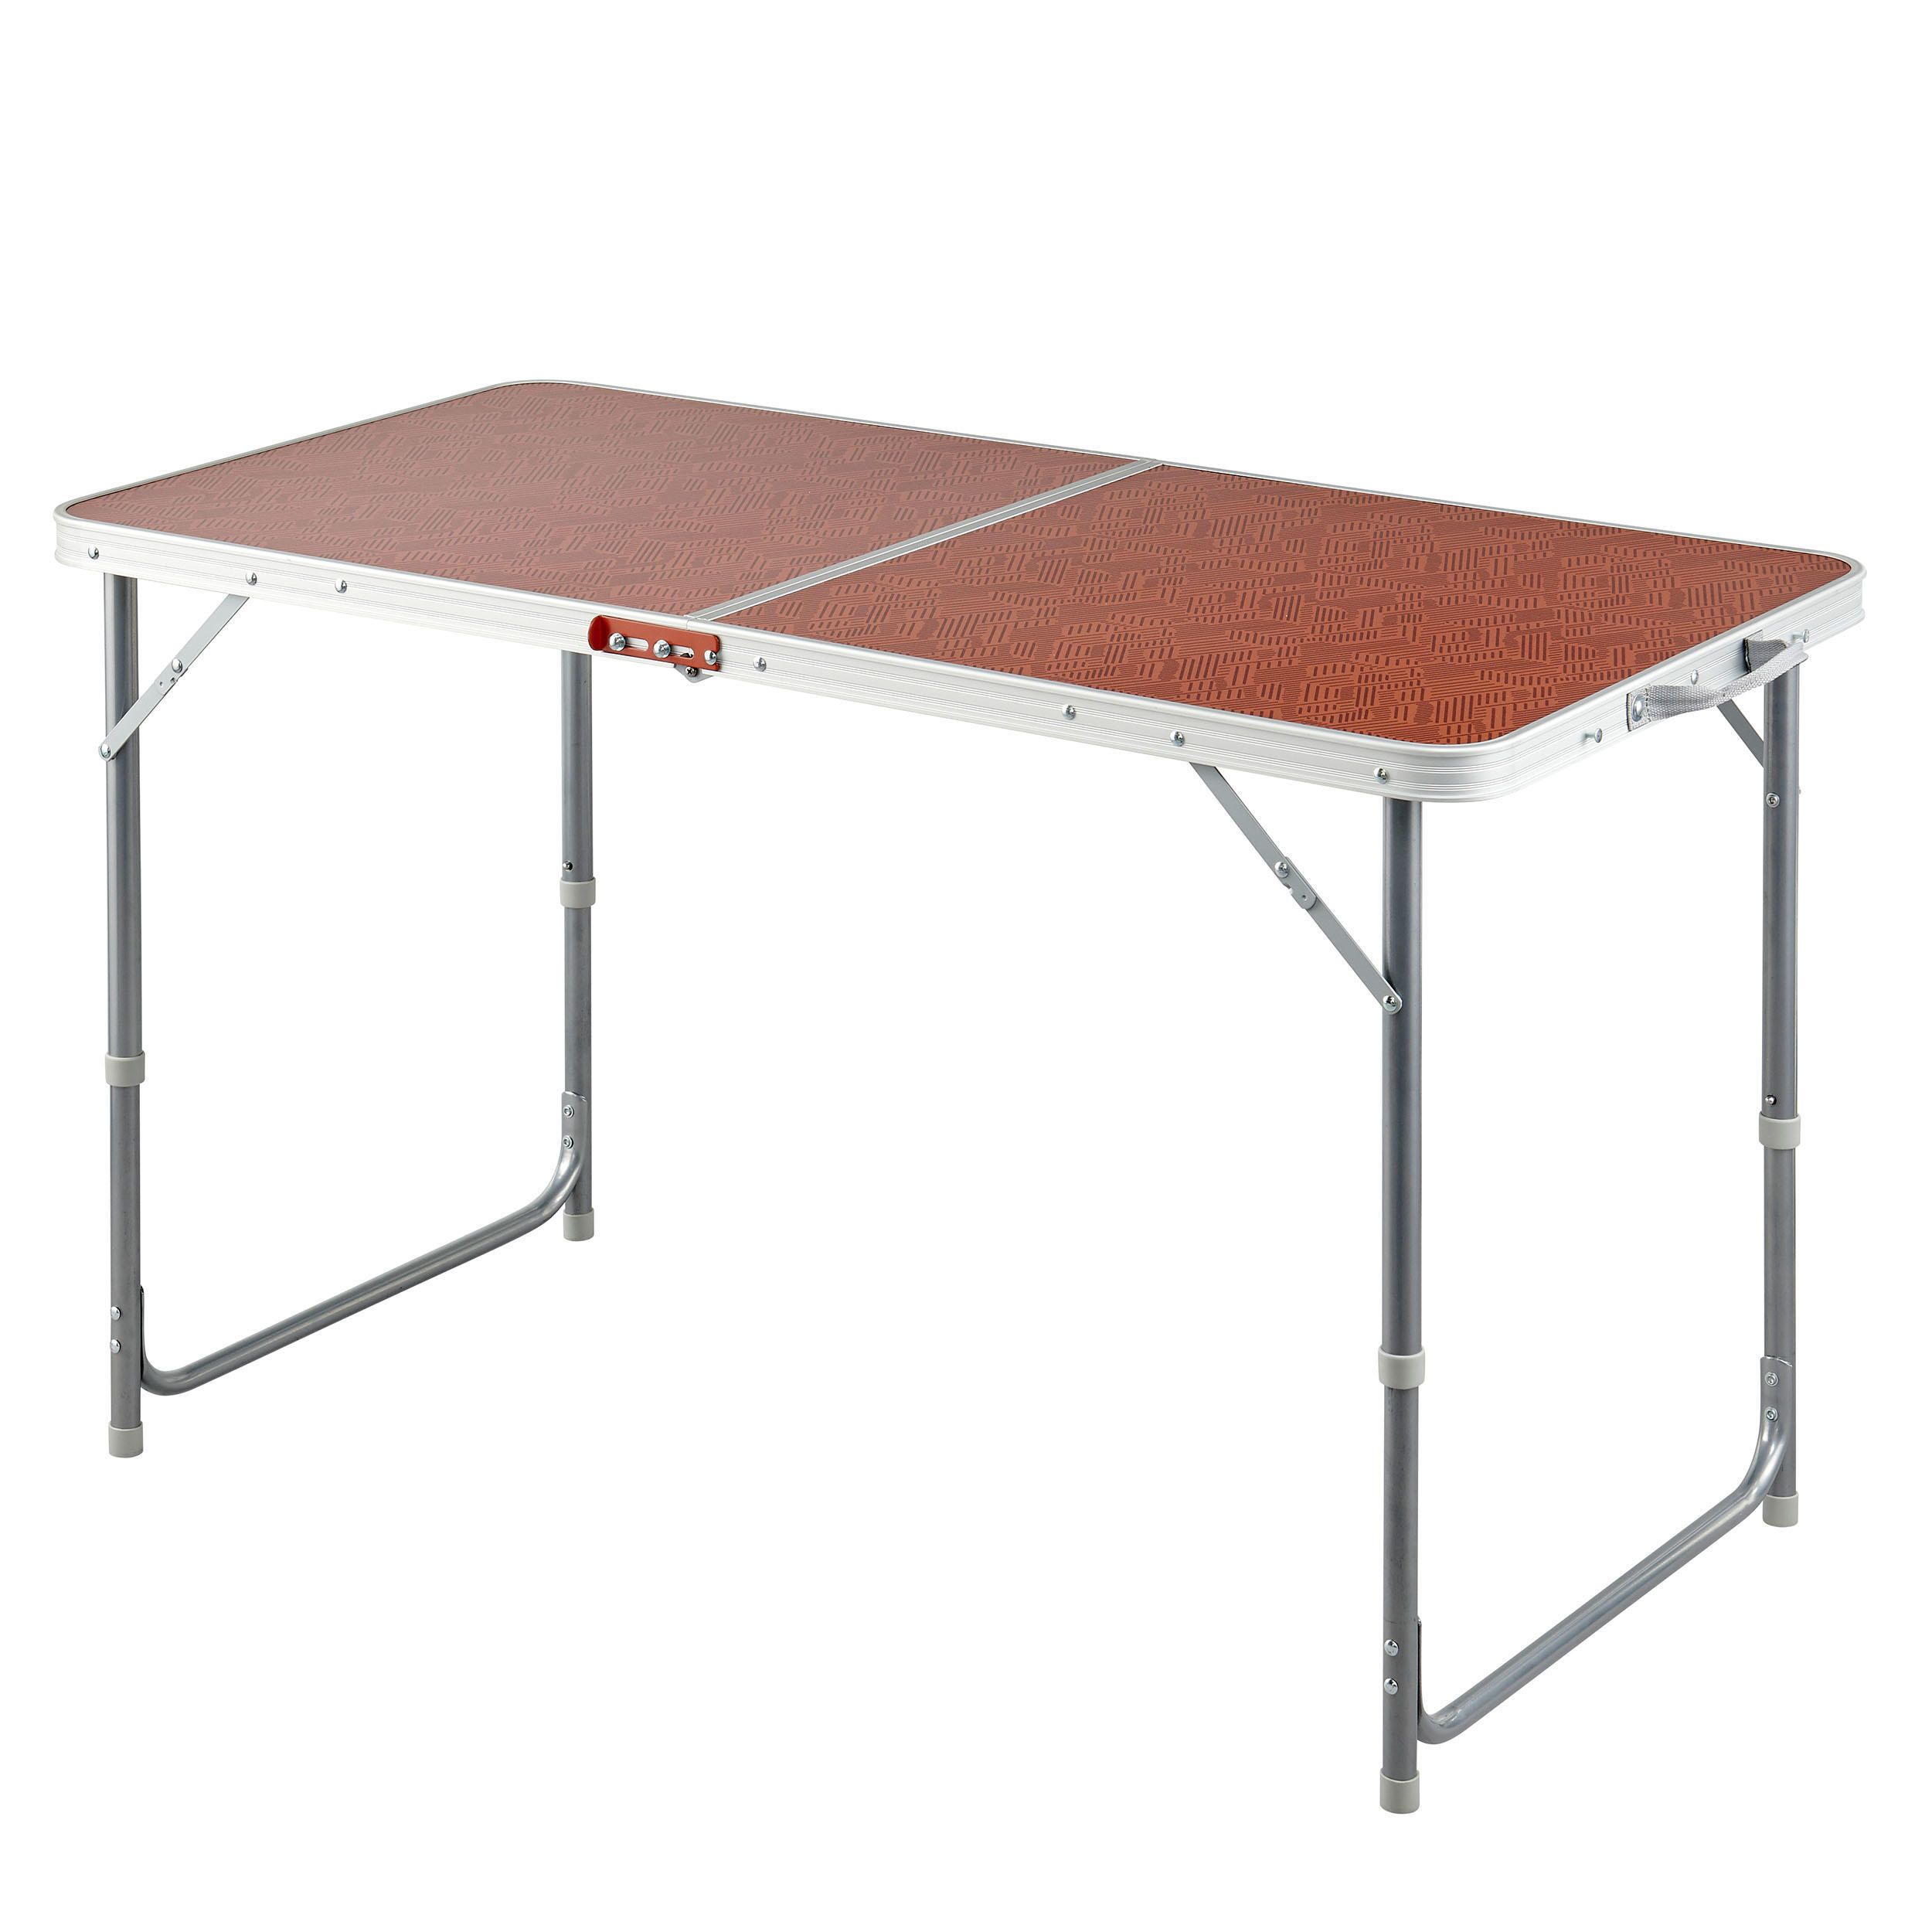 QUECHUA FOLDING CAMPING TABLE - 4 TO 6 PEOPLE